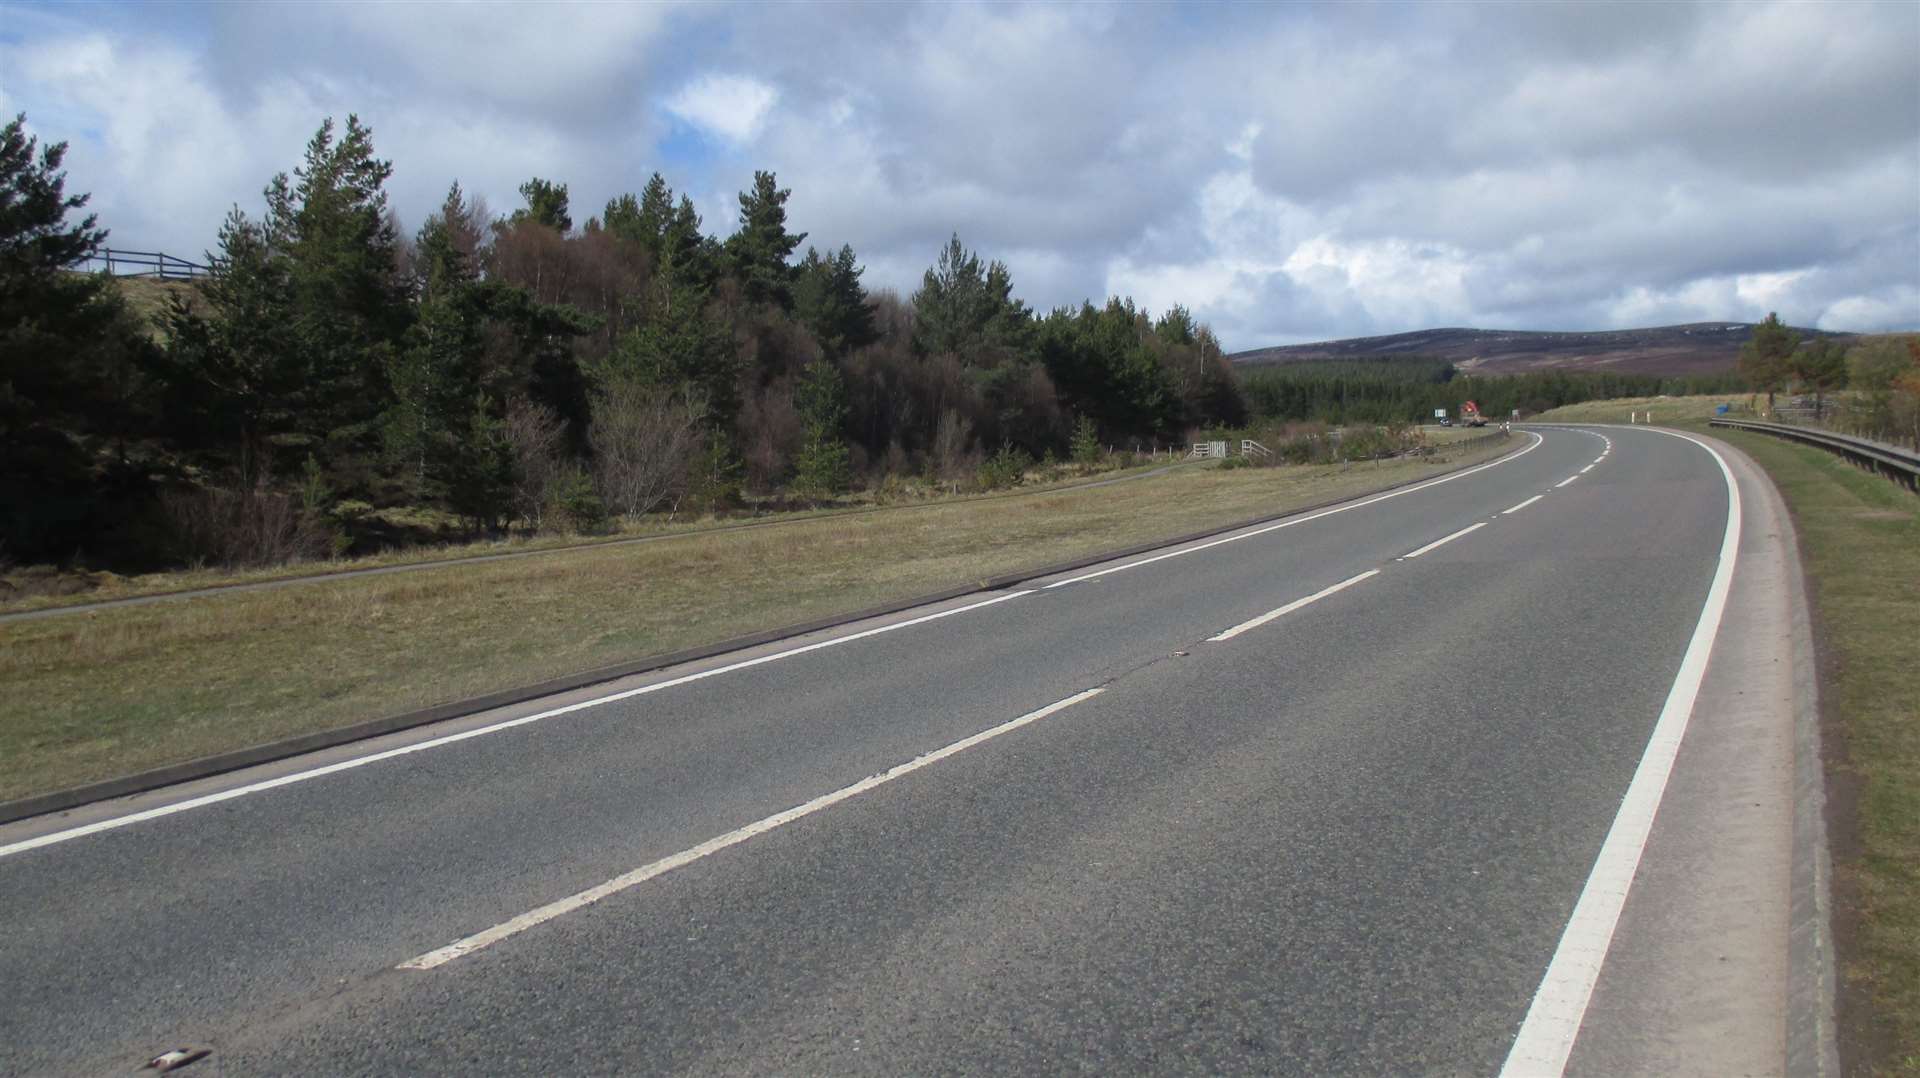 A six mile stretch of the A9 between Tomatin and Moy set for dualling is now delayed.